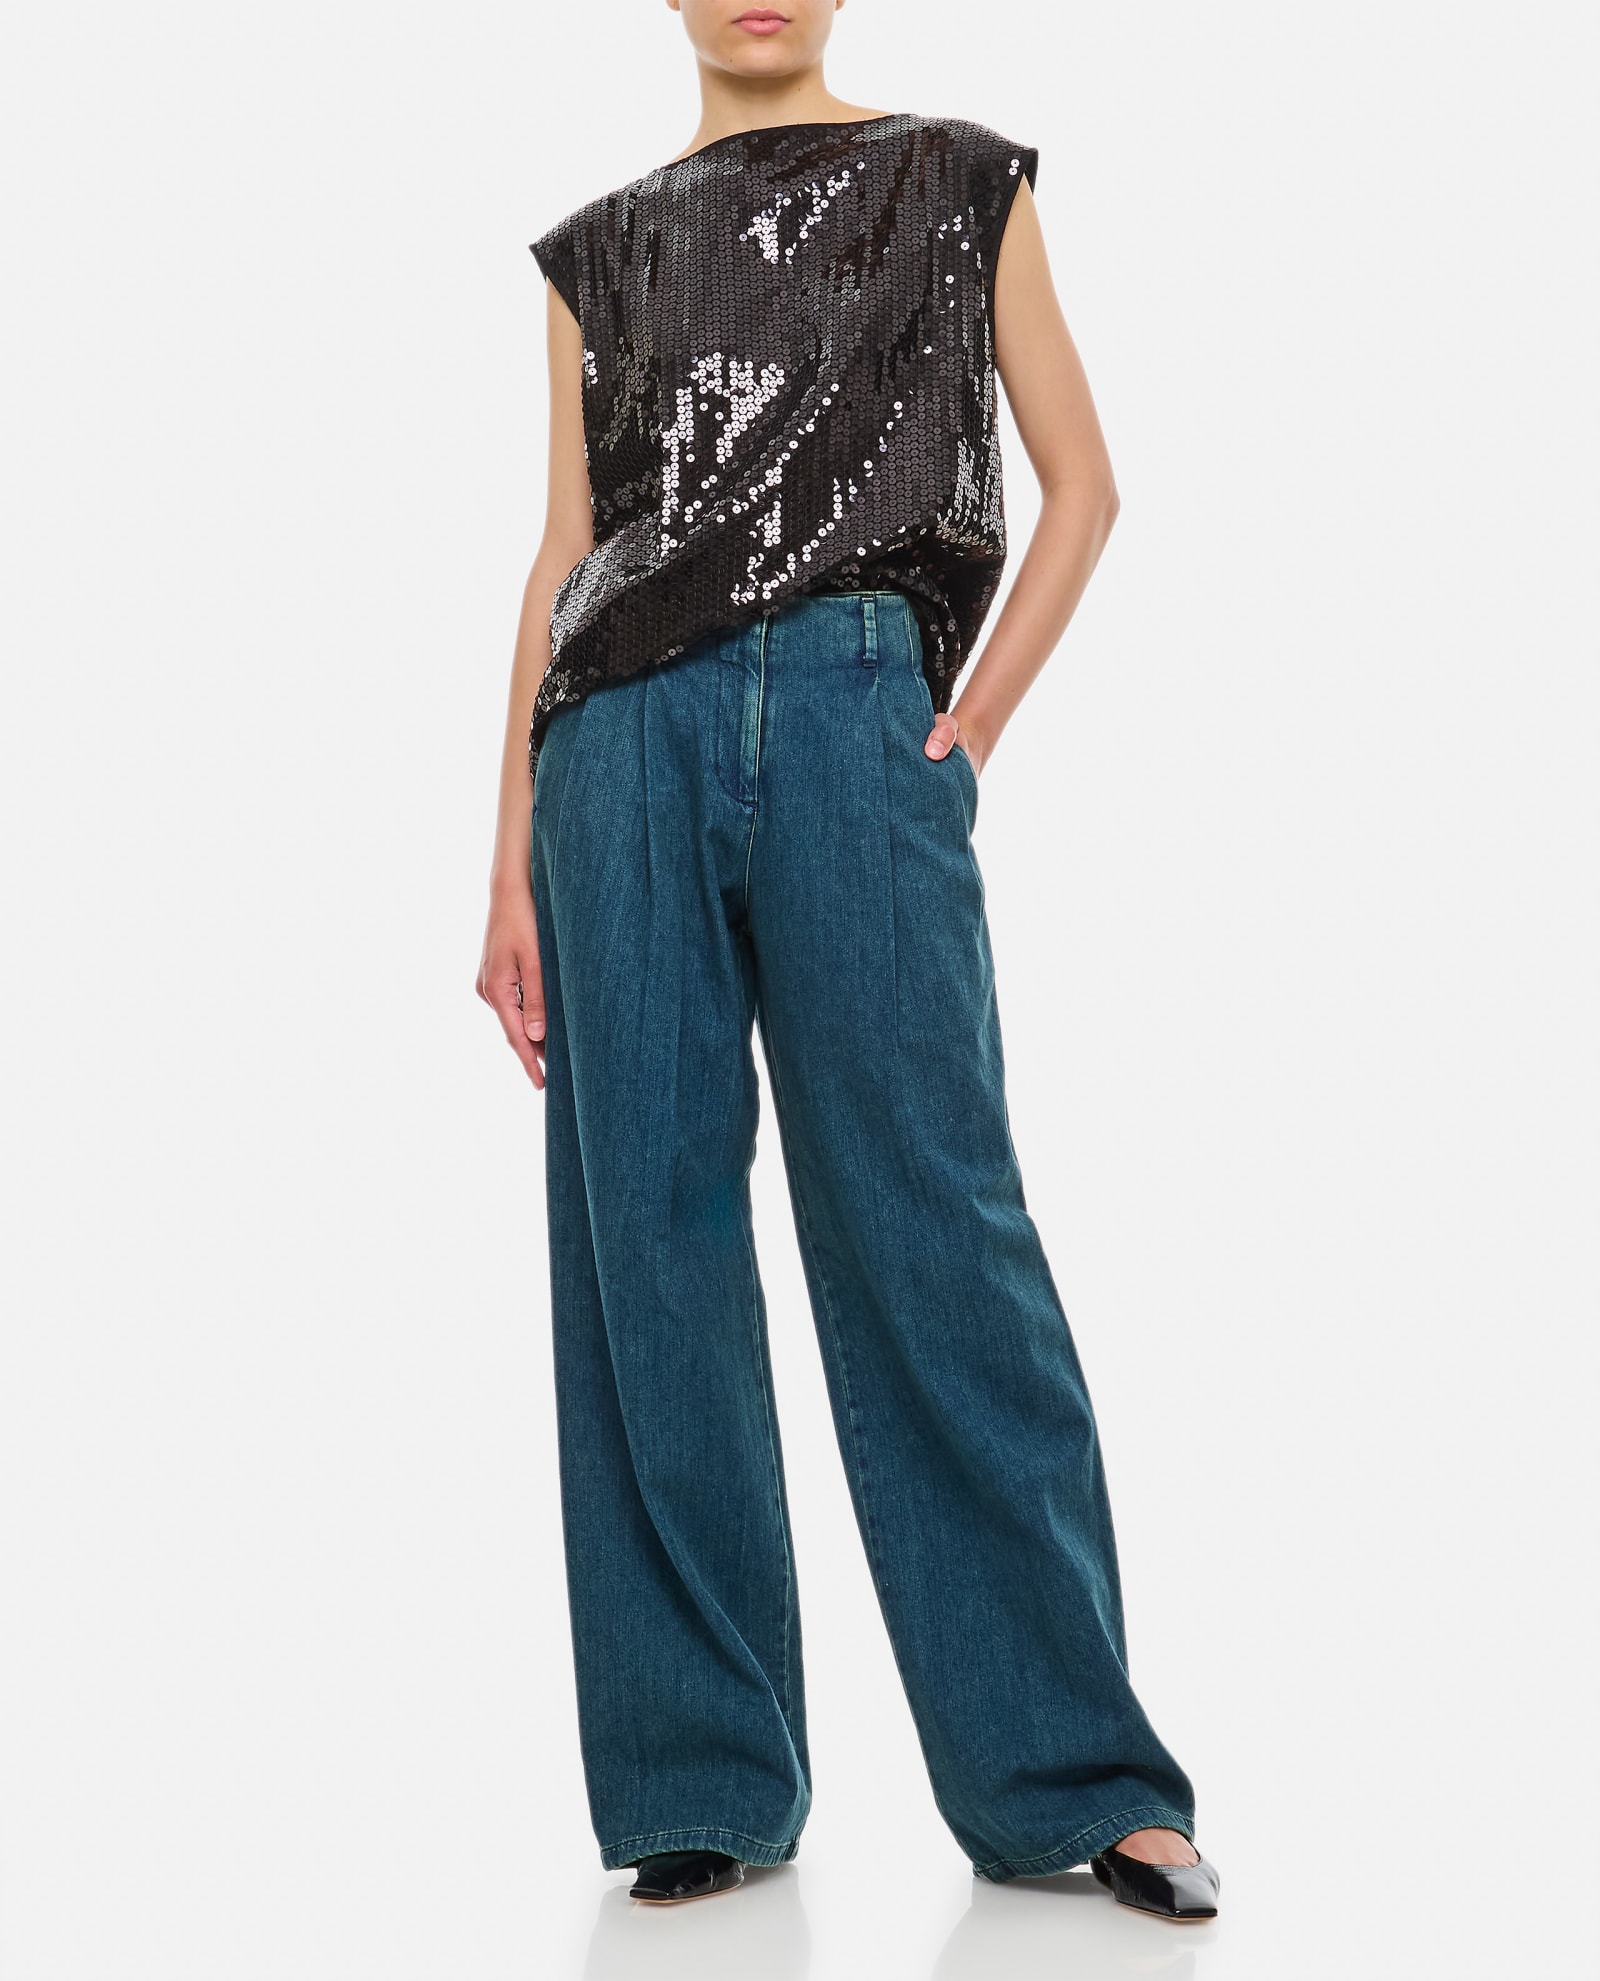 Shop Junya Watanabe Embroidered Sequins Top In Black